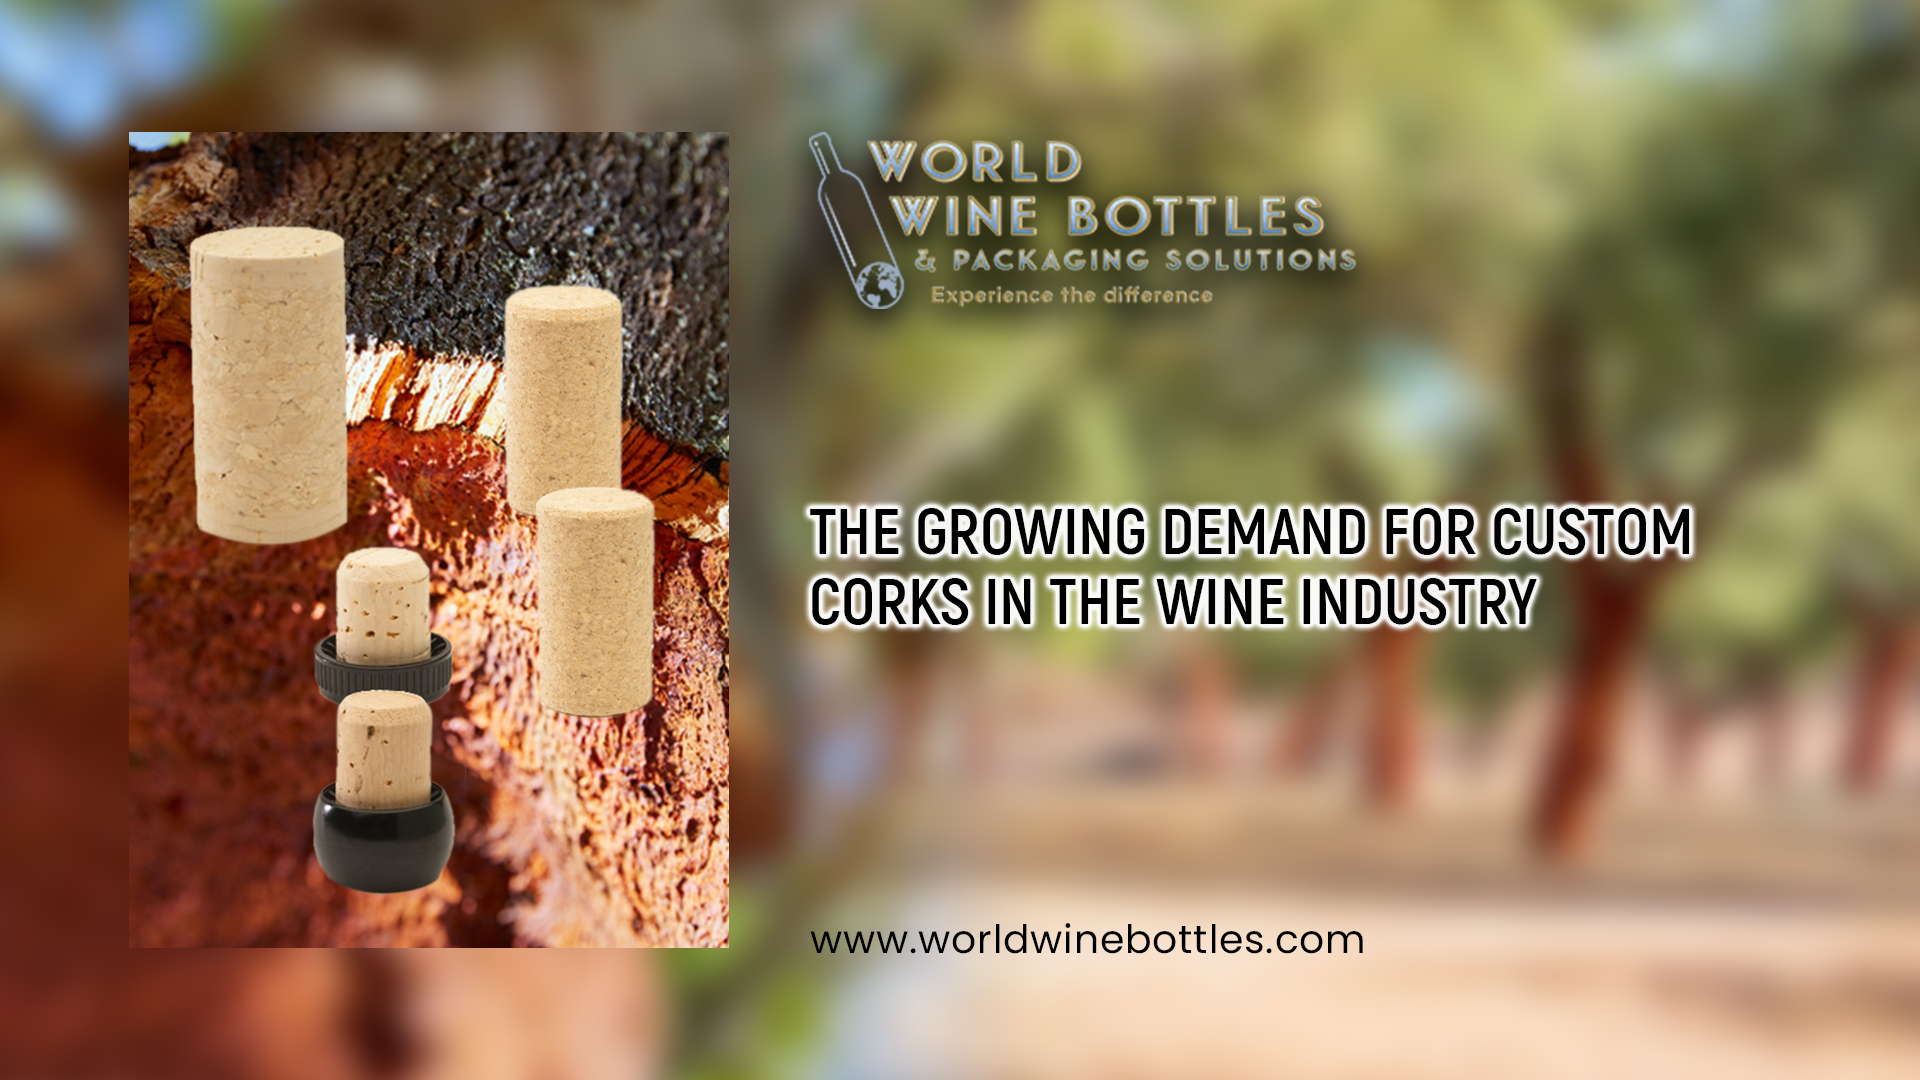 The Growing Demand for Custom Corks in the Wine Industry